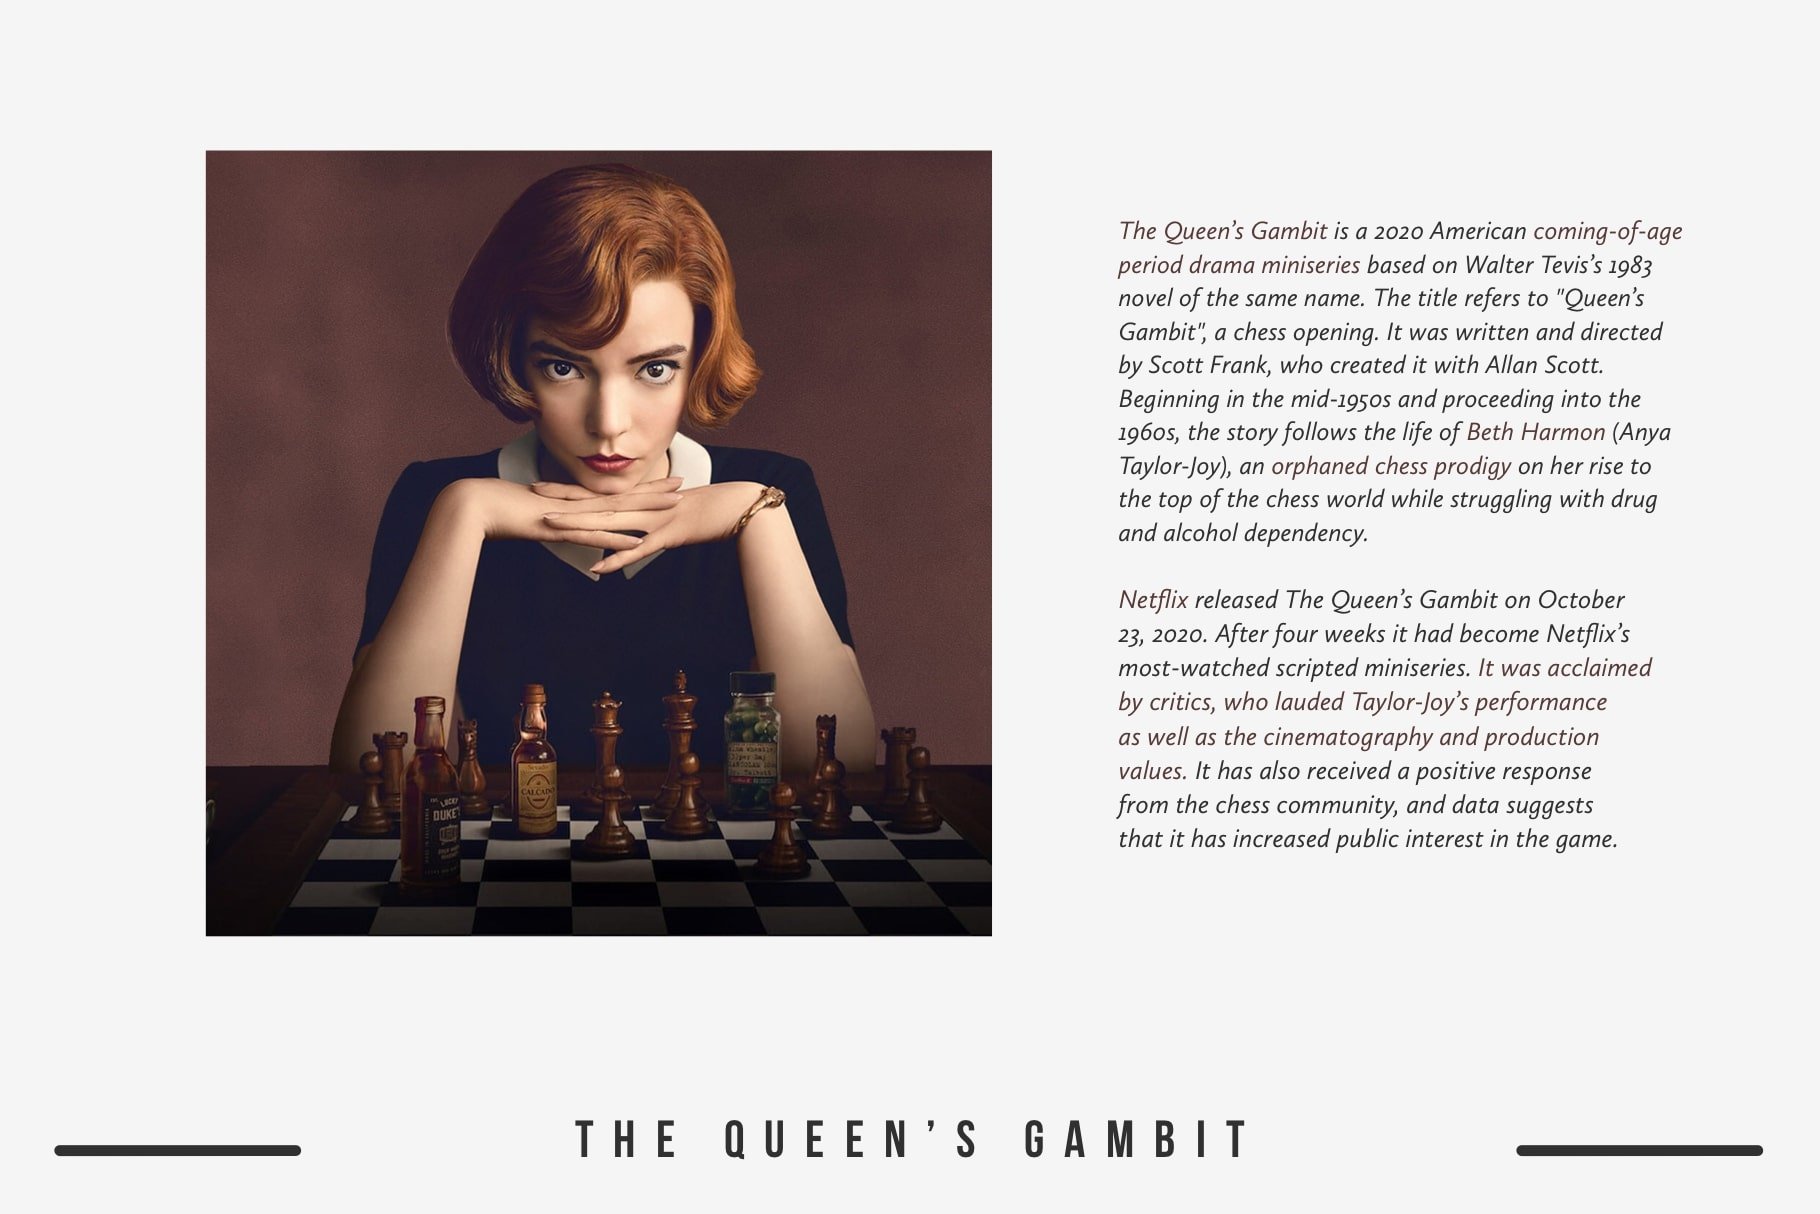 The Queen's Gambit - Netflix Miniseries - Where To Watch